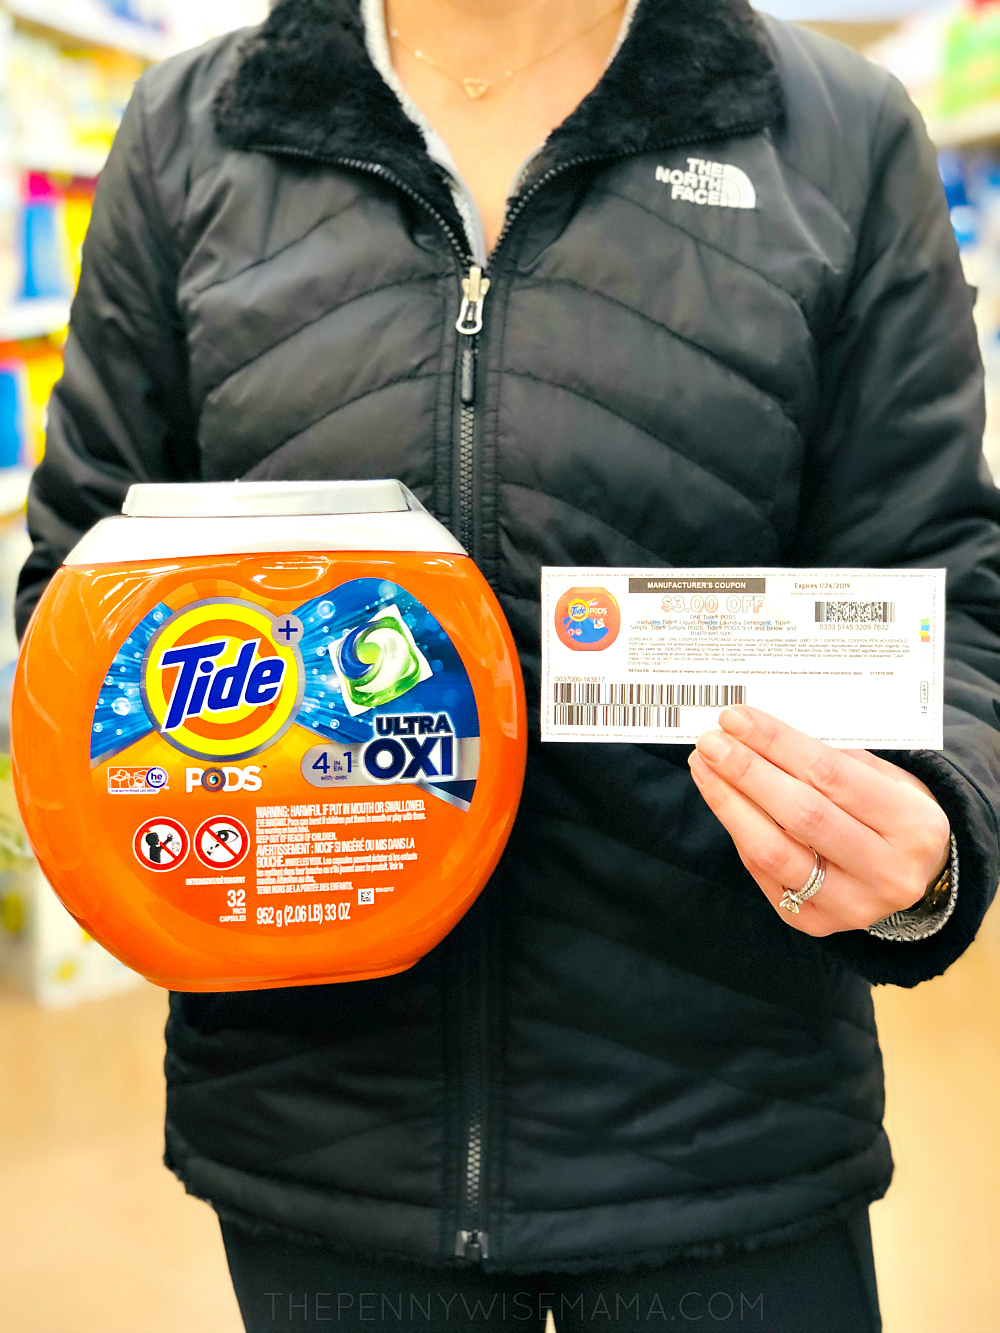 Save 3 On Tide Pods Laundry Detergent Printable Coupon The Pennywisemama